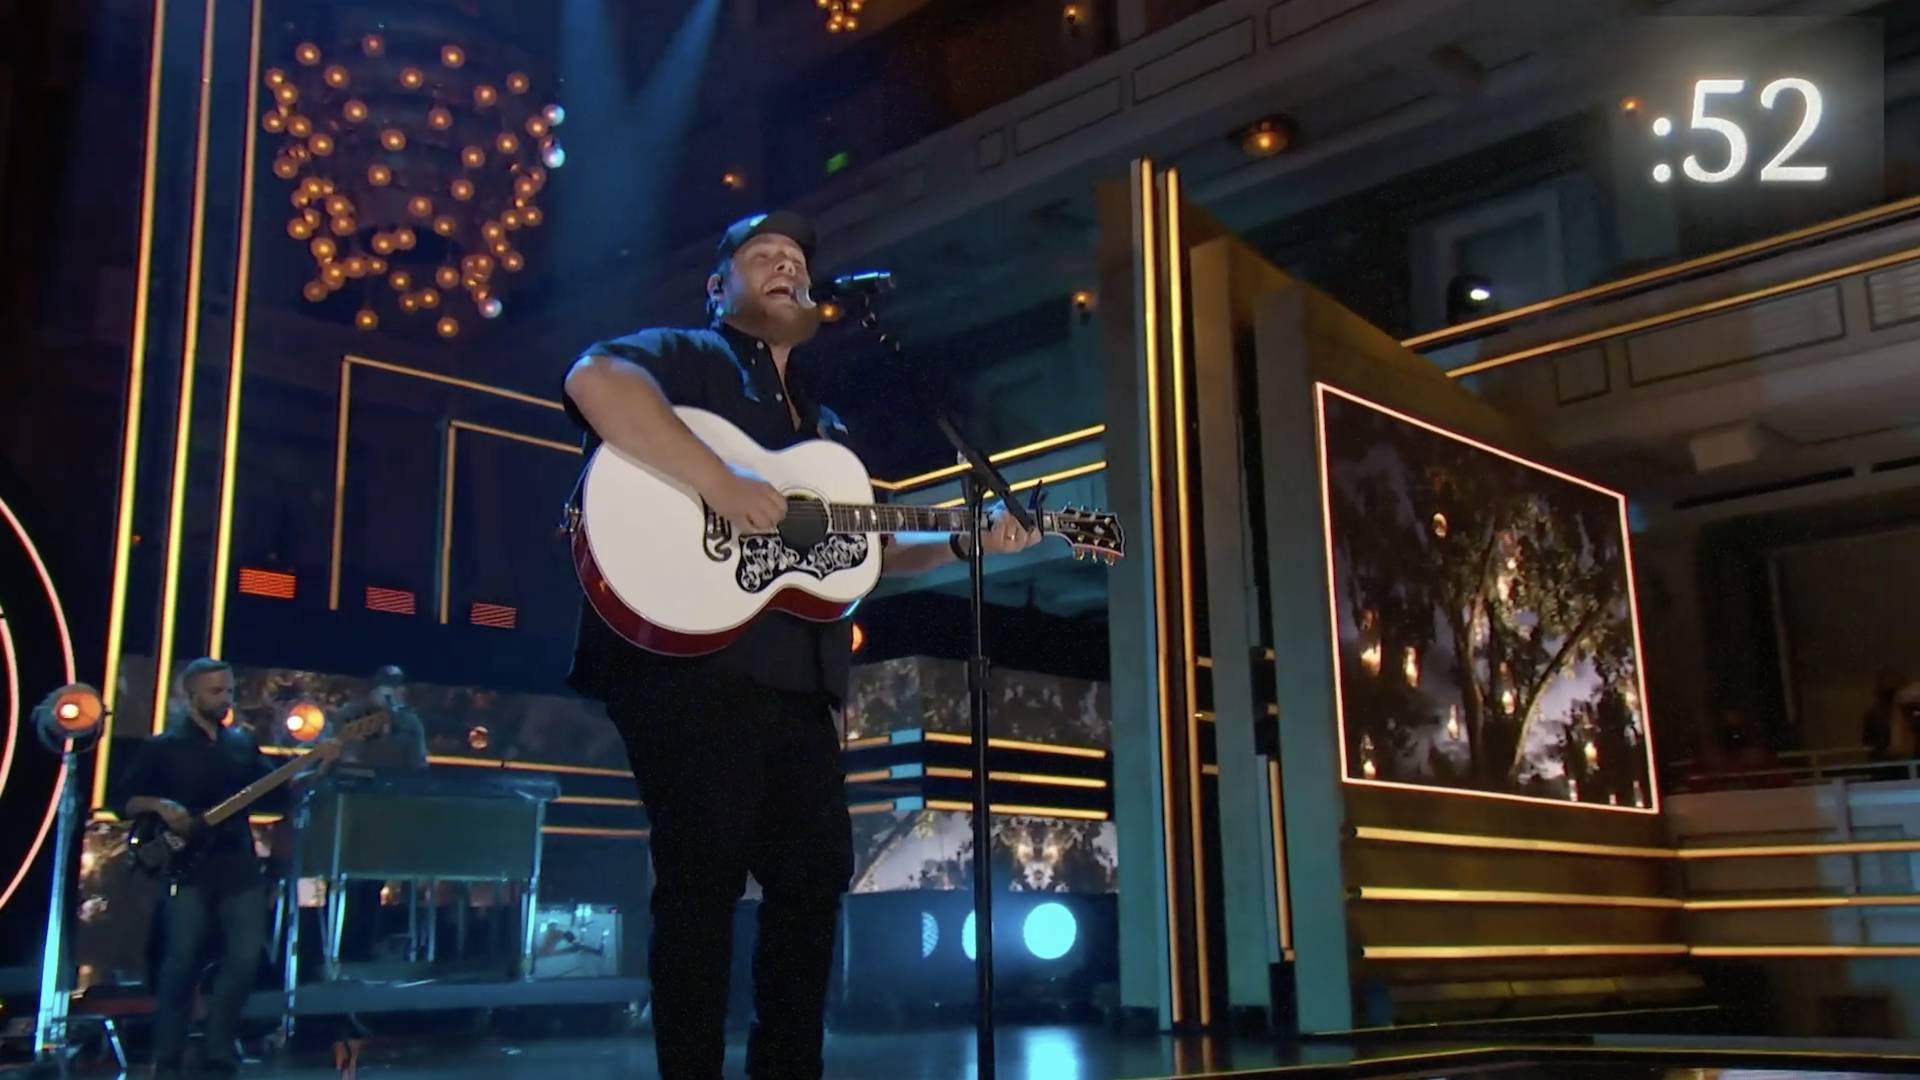 Luke Combs performing on stage at CMT Artist of the Year 2021.